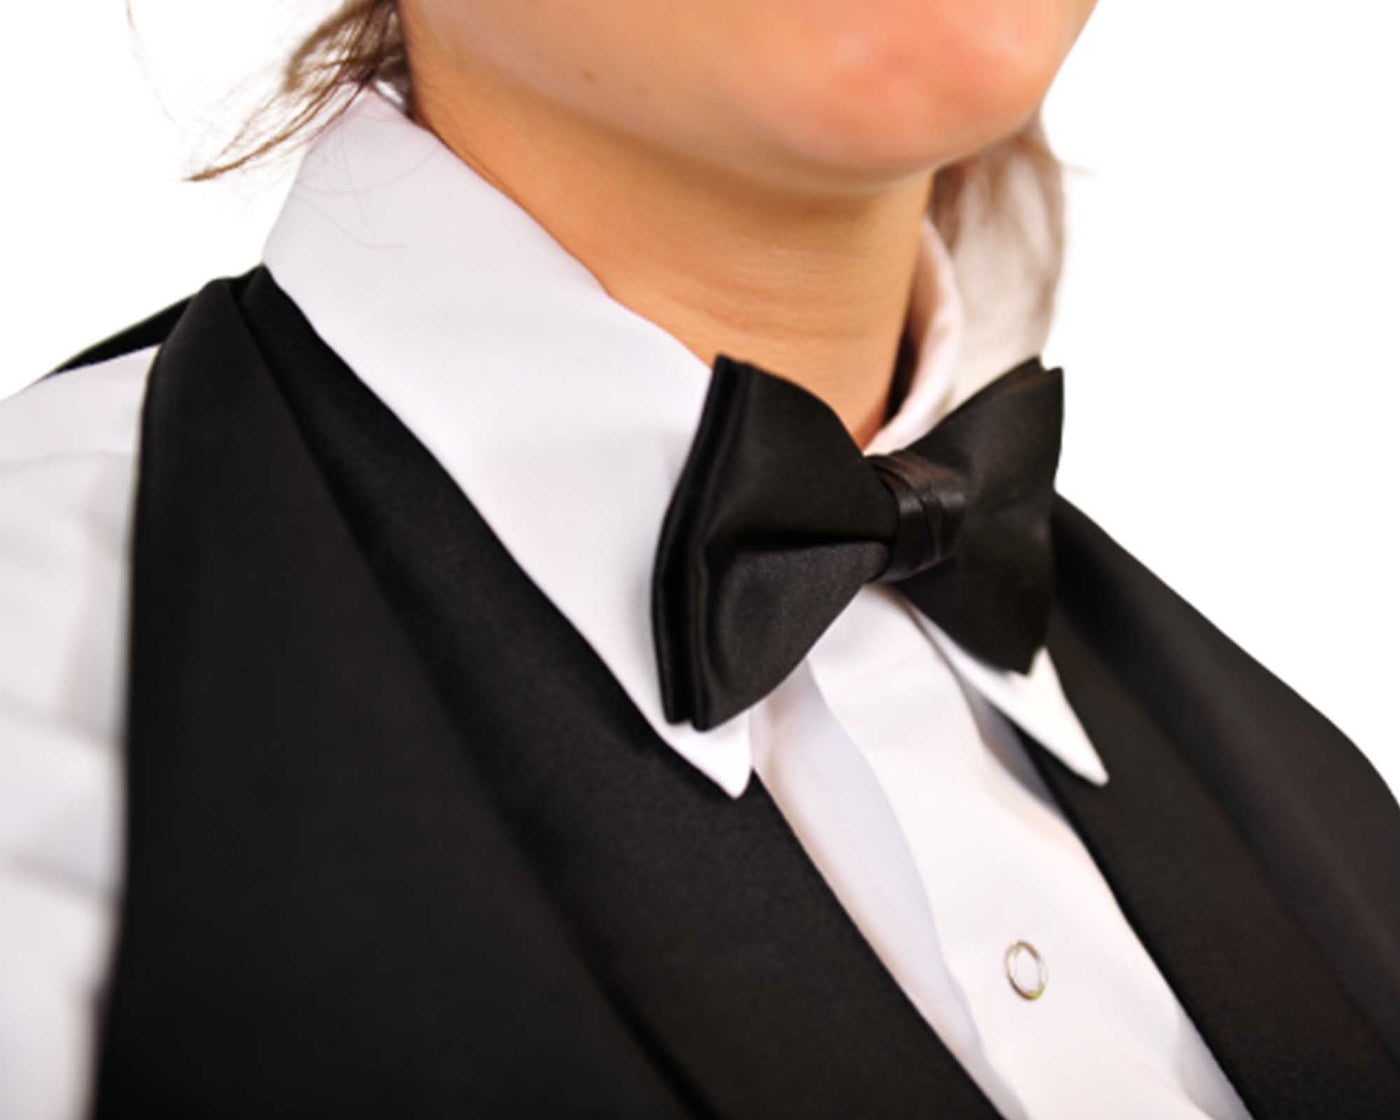 lady wearing black bow tie and tuxedo apron